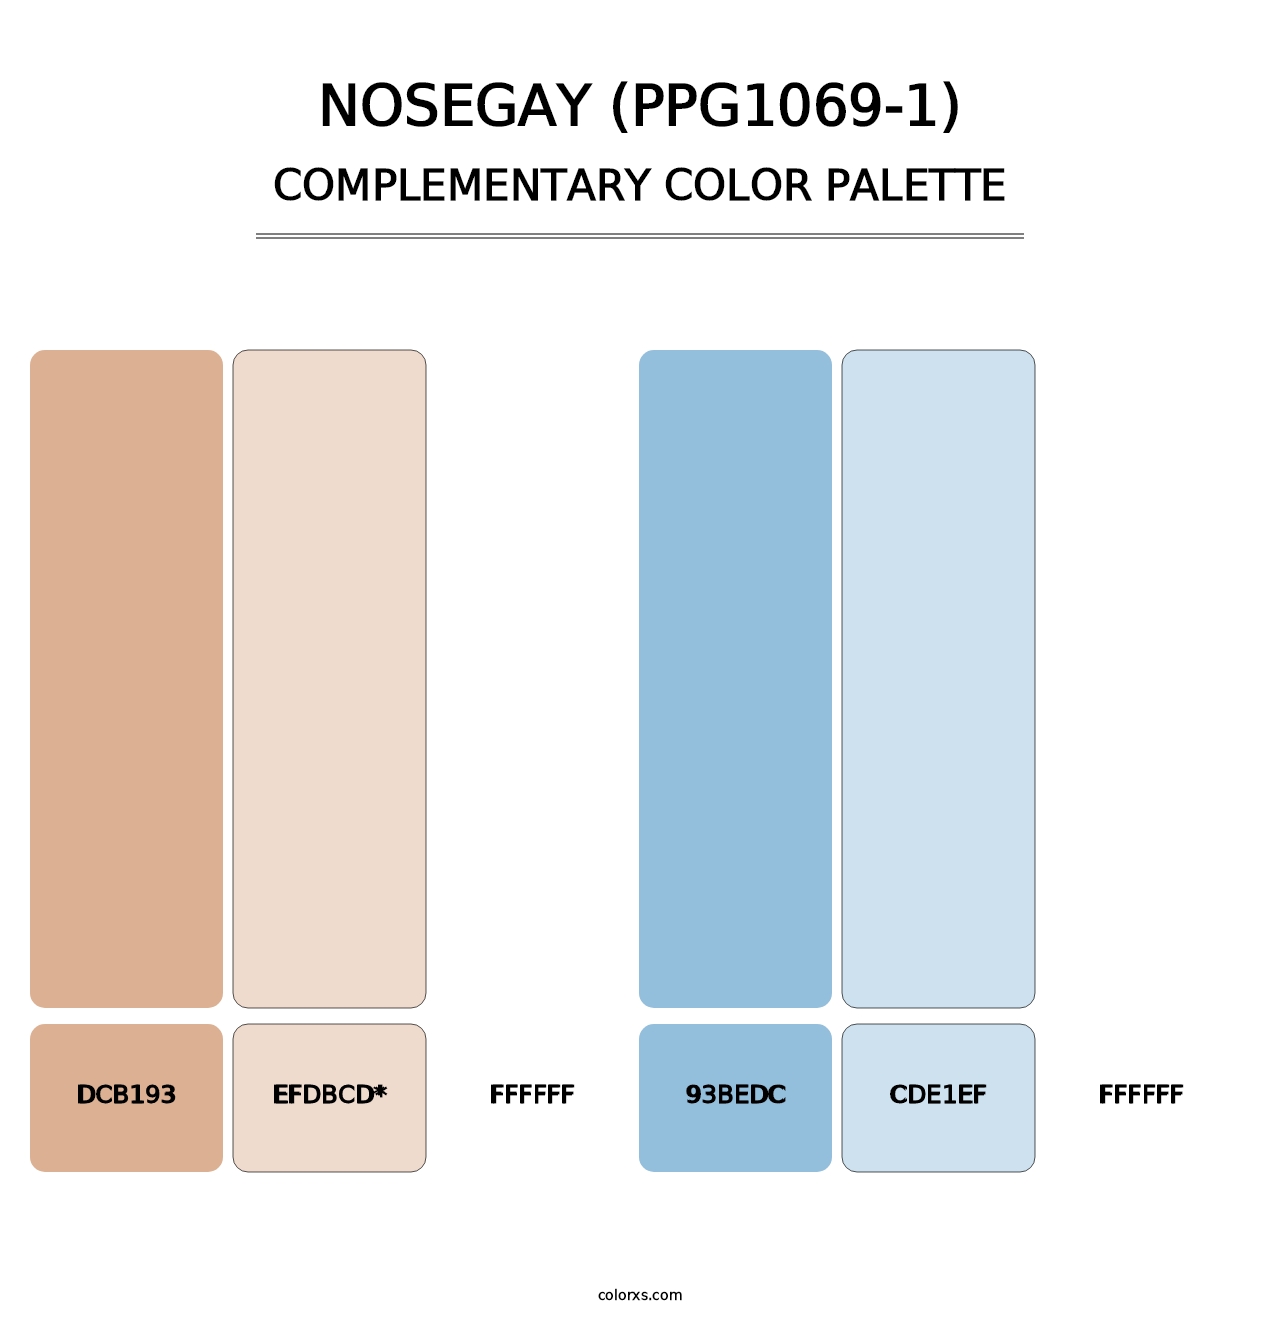 Nosegay (PPG1069-1) - Complementary Color Palette